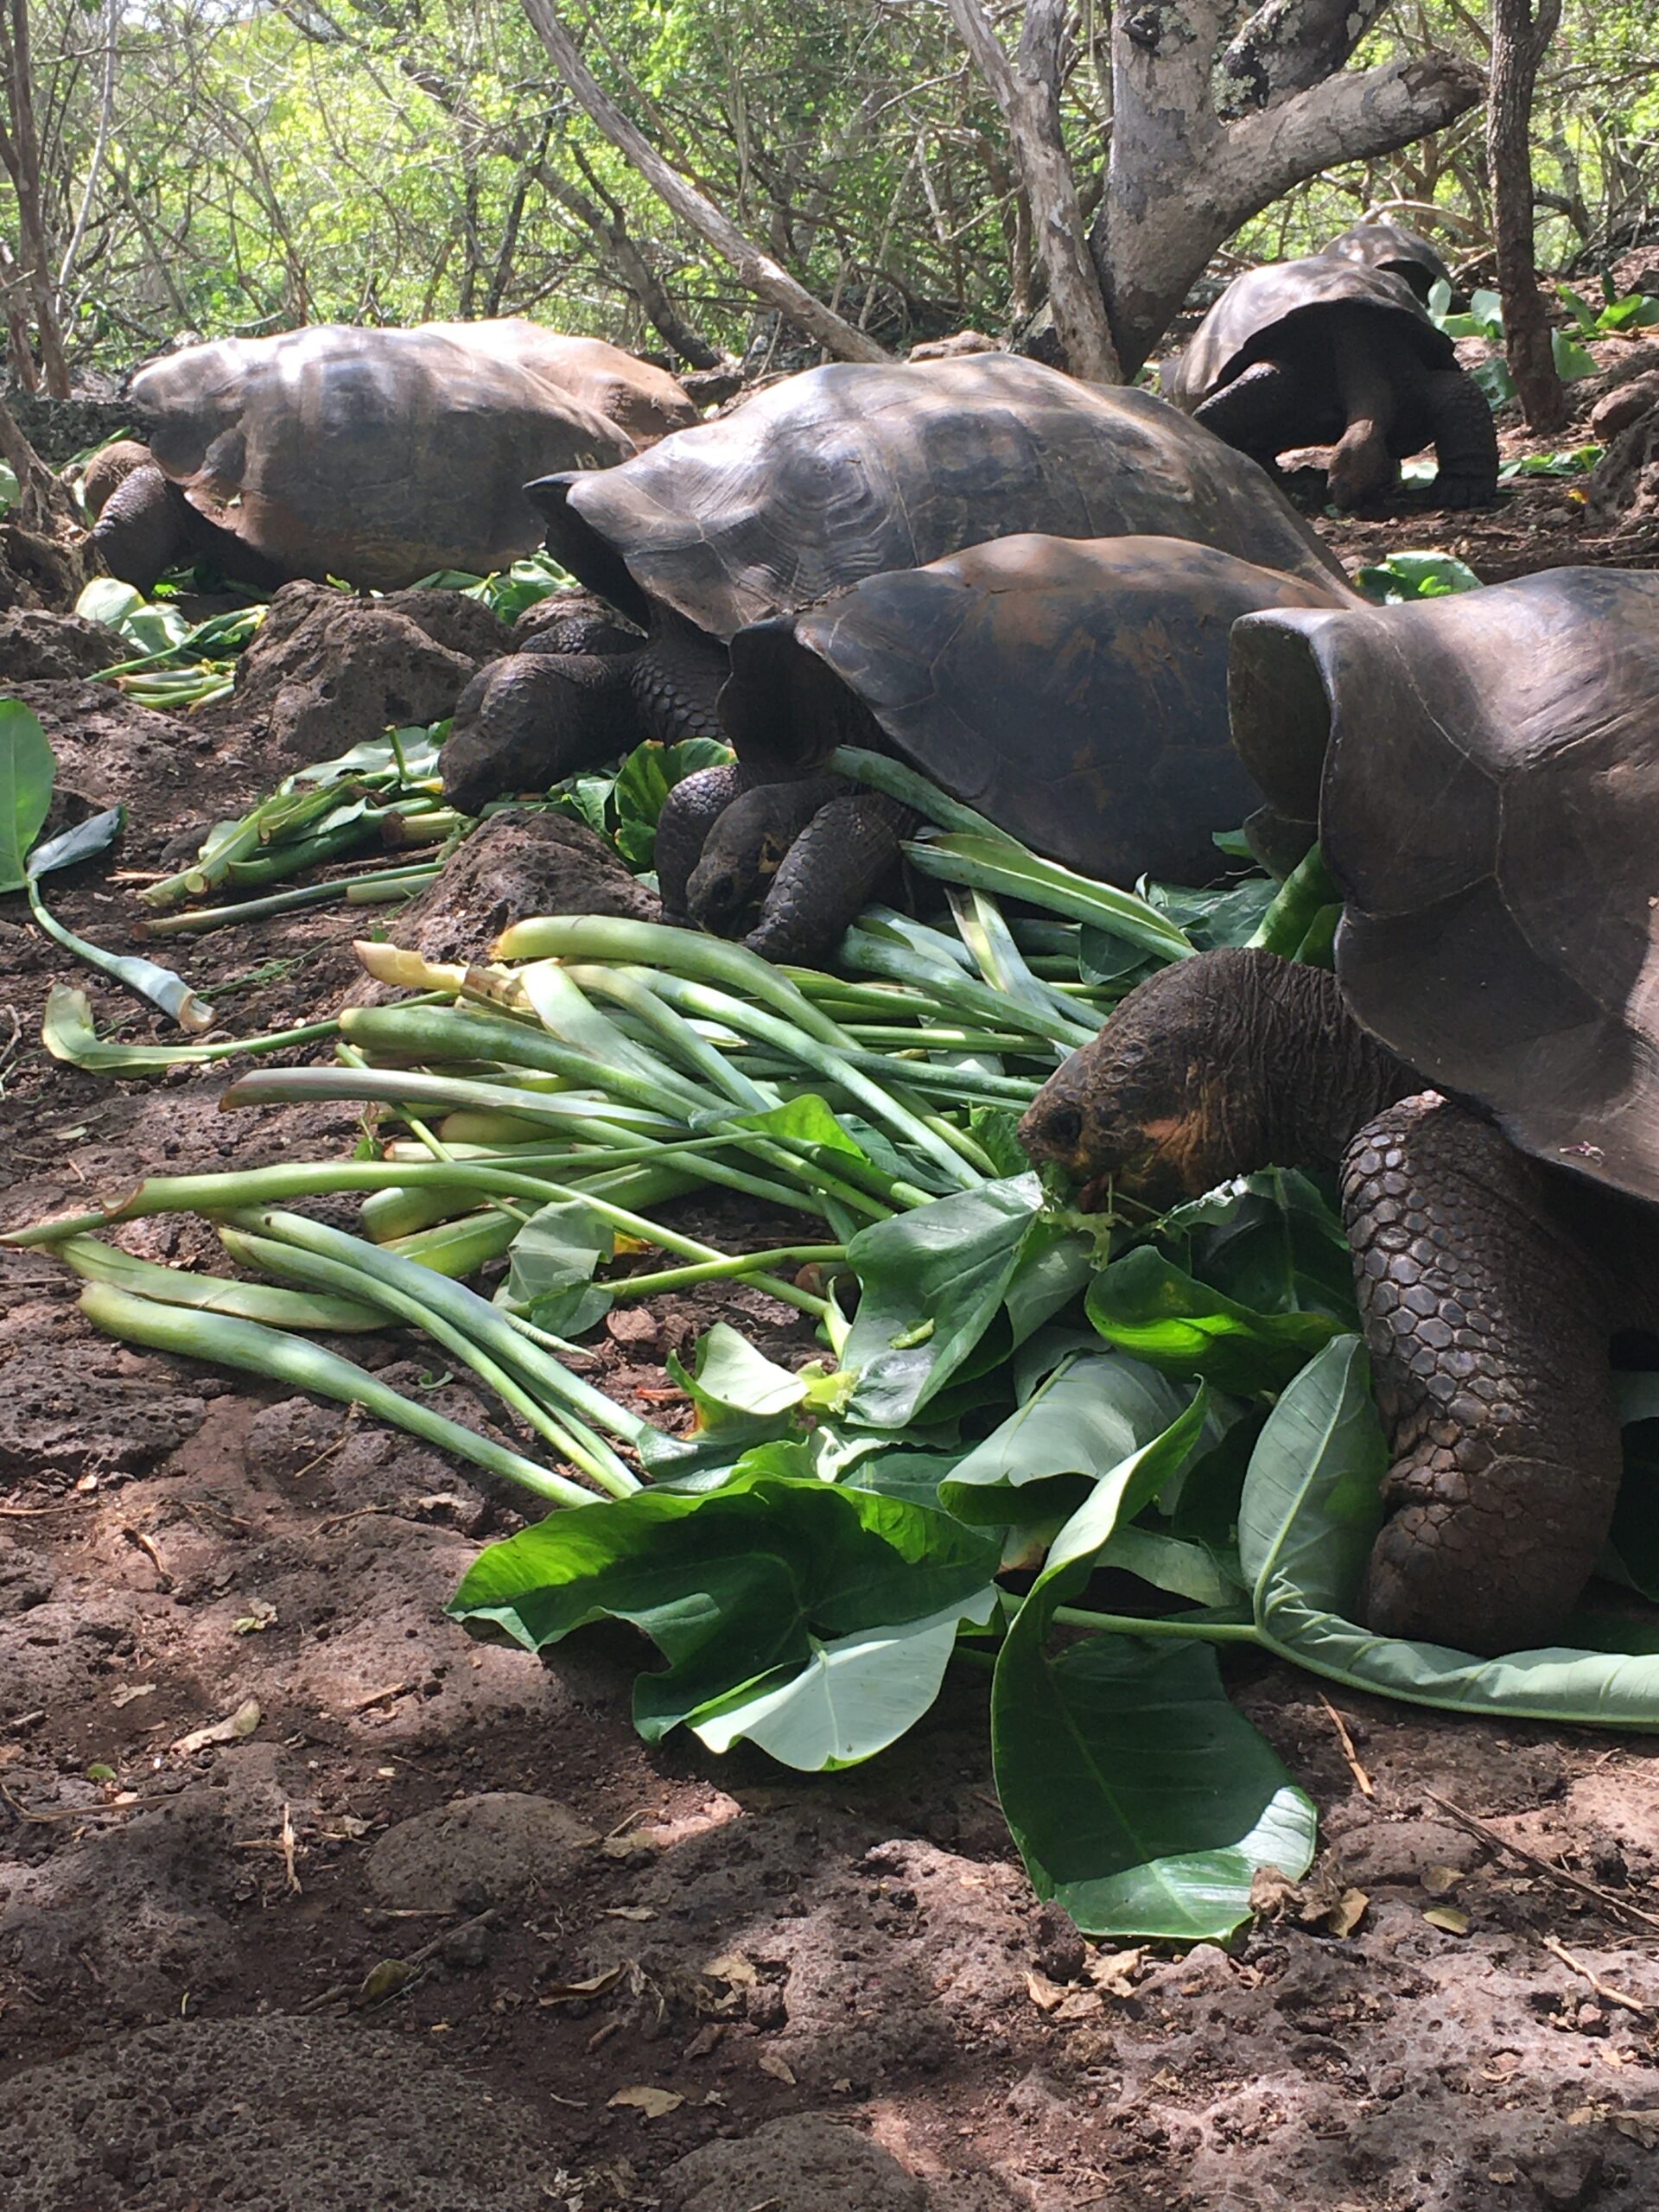 Pictured is a line of tortoises eating greenery. They are in a wooded sanctuary.